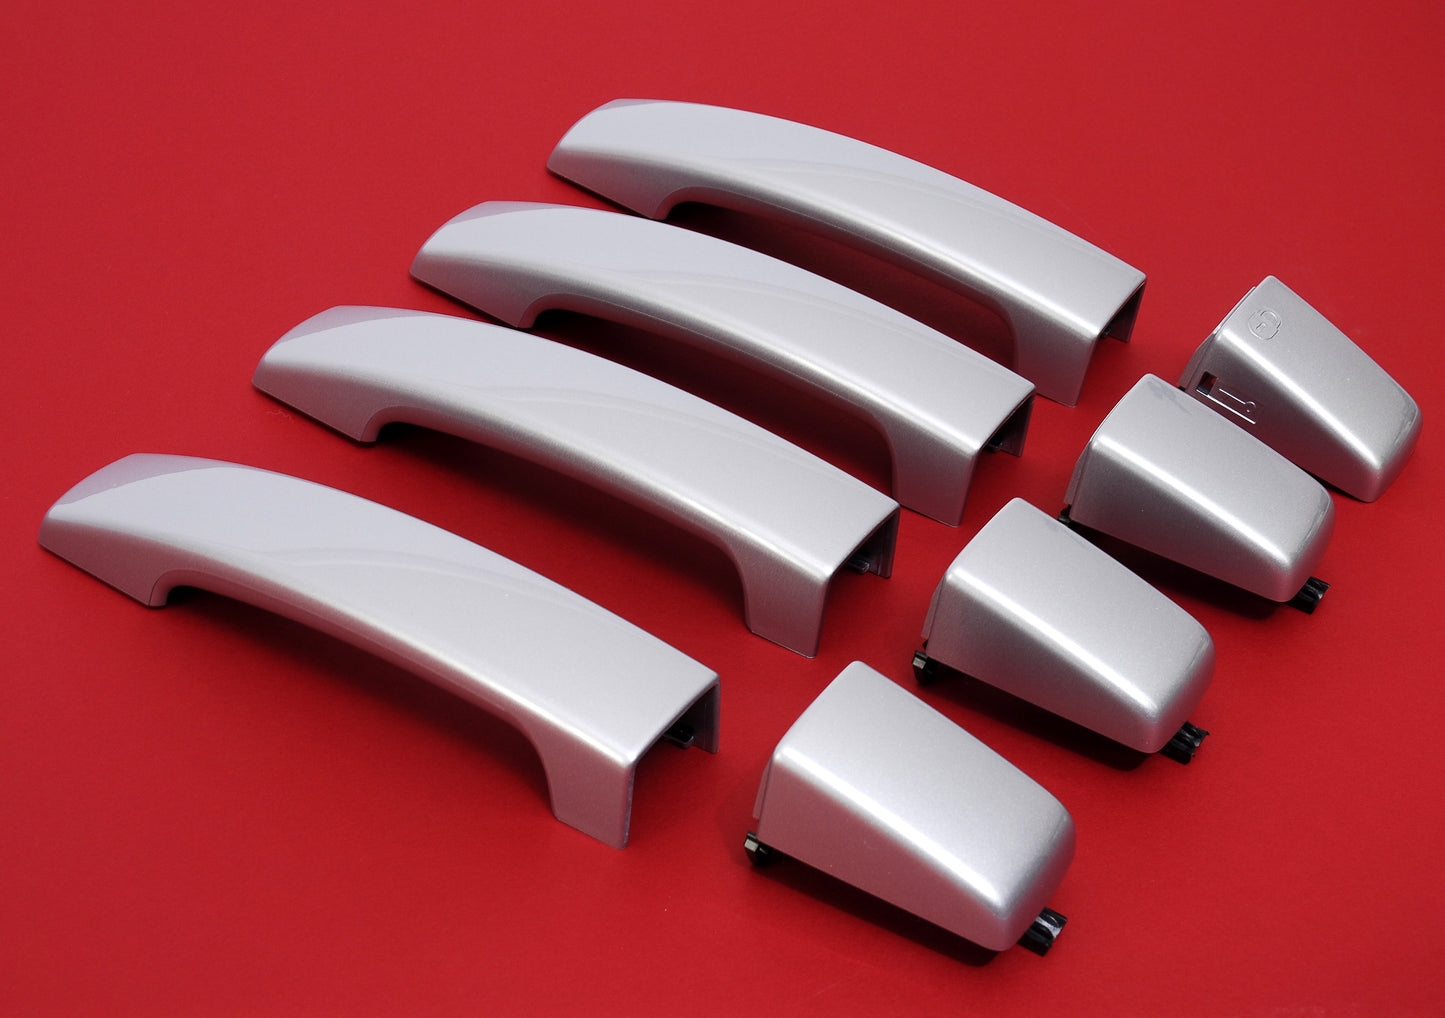 Door Handle "Skins" for Land Rover Freelander 2 fitted with 2 pc Handle - Zambezi Silver